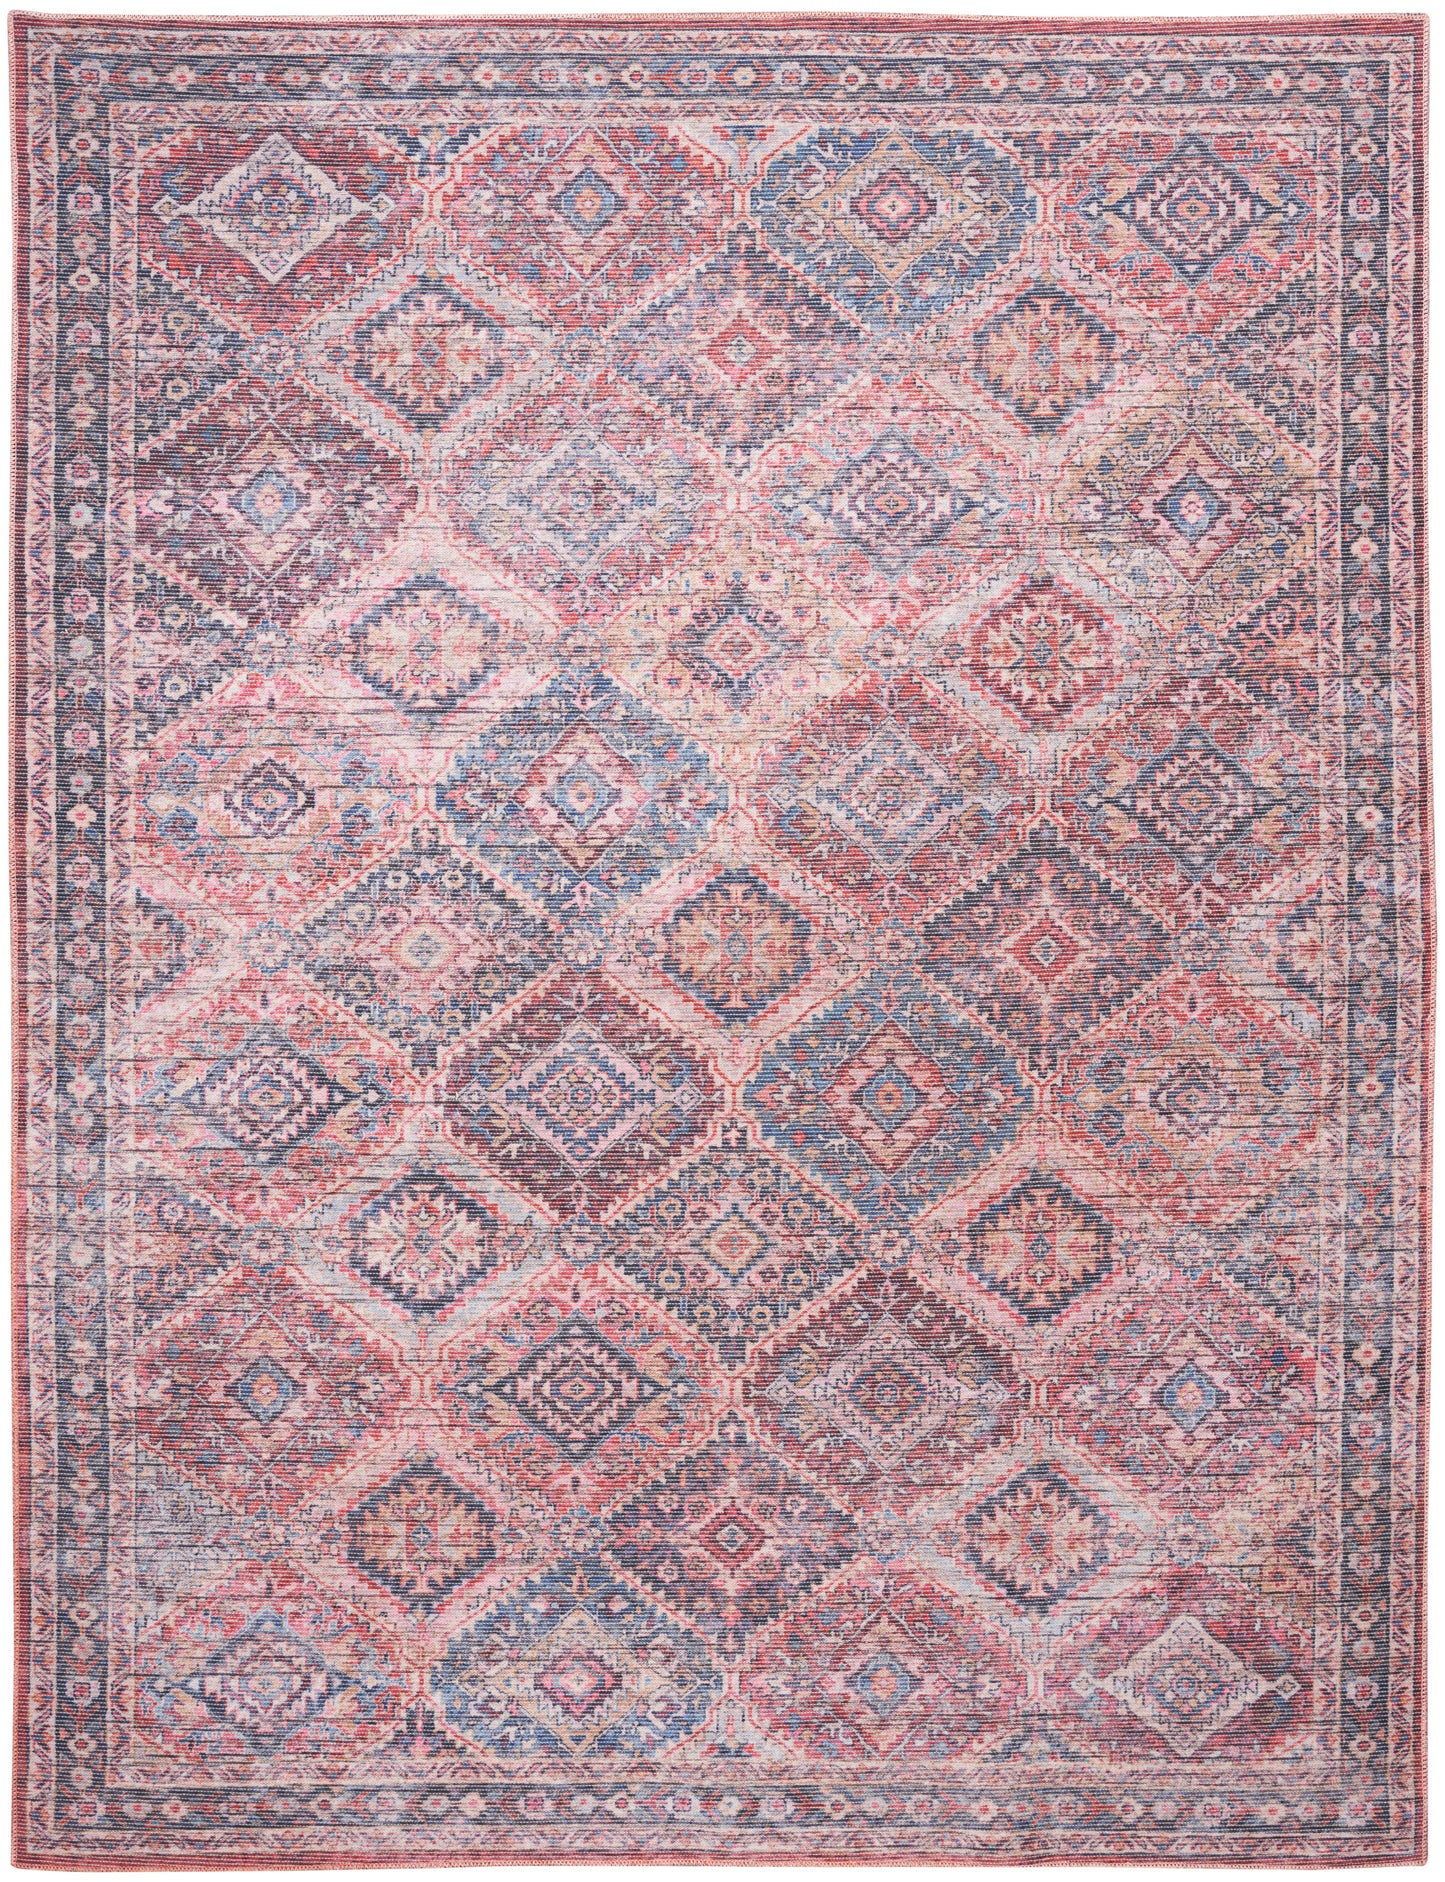 Nicole Curtis Machine Washable Series 1 SR103 Multicolor  Traditional Machinemade Rug